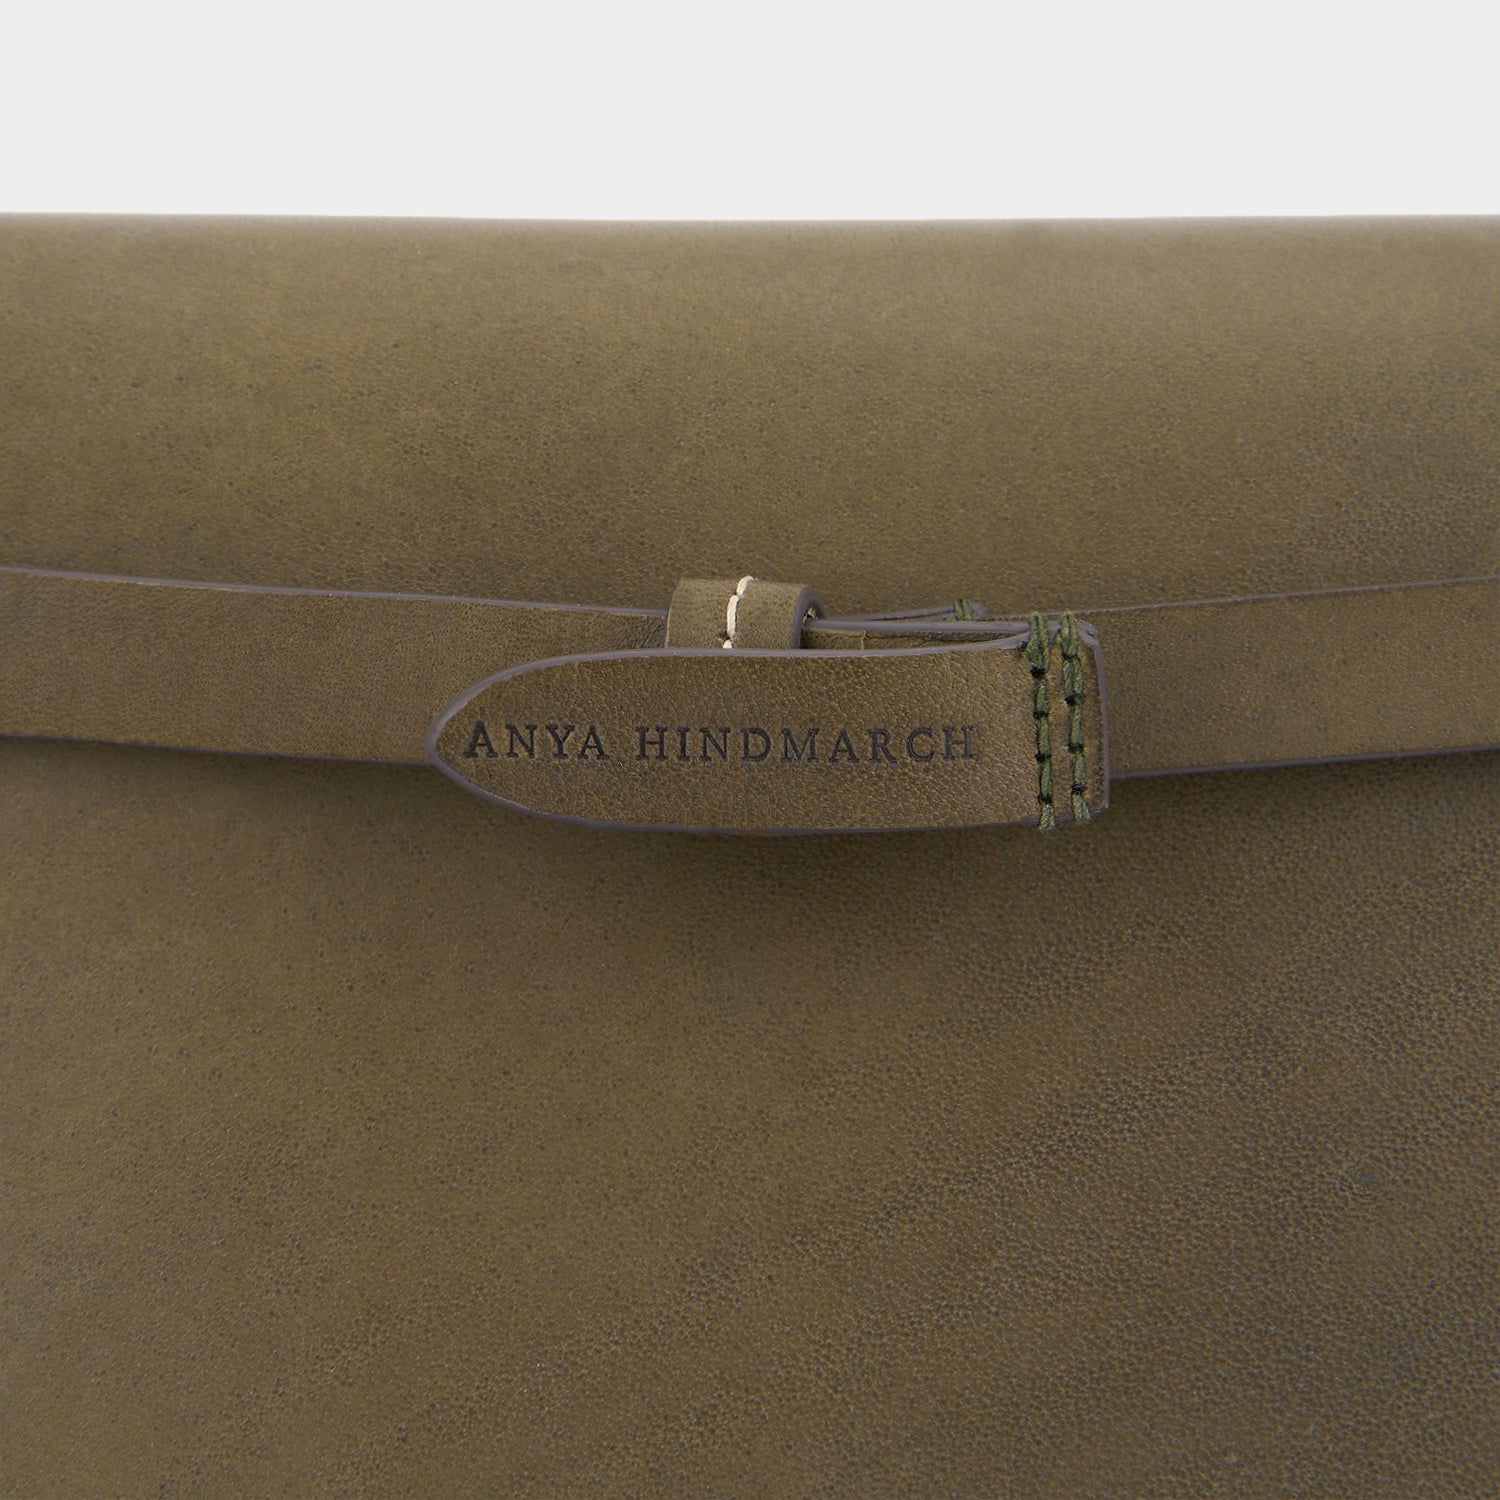 「Return to Nature」 クロスボディ -

                  
                    Compostable Leather in Fern -
                  

                  Anya Hindmarch JP
